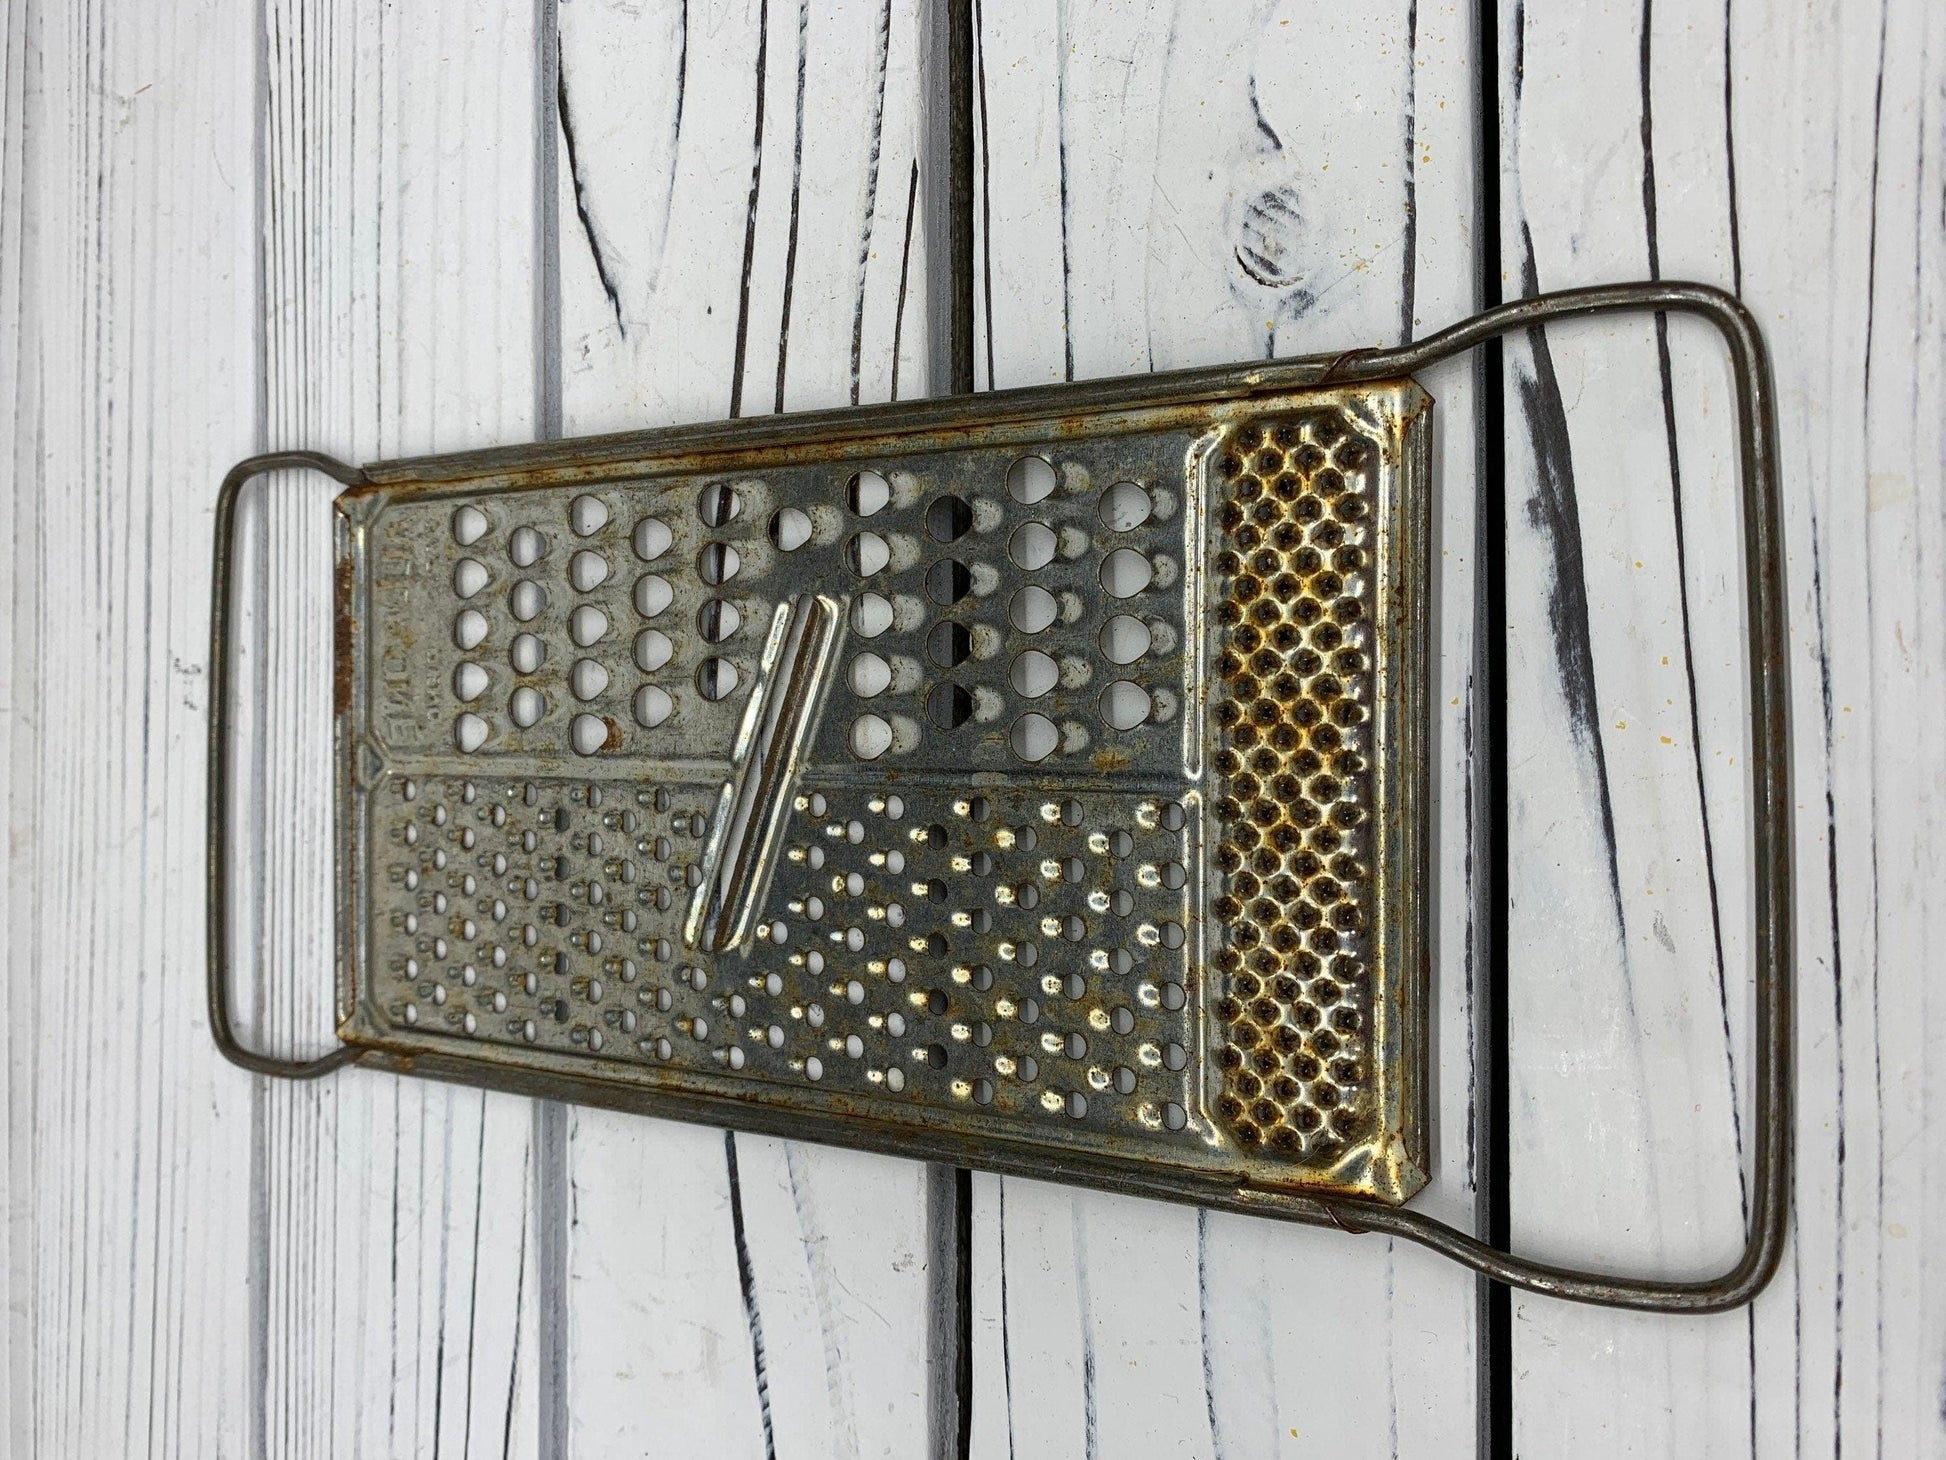 Vintage Metal Cheese Grater, All In One Mid Century Grater, Mid